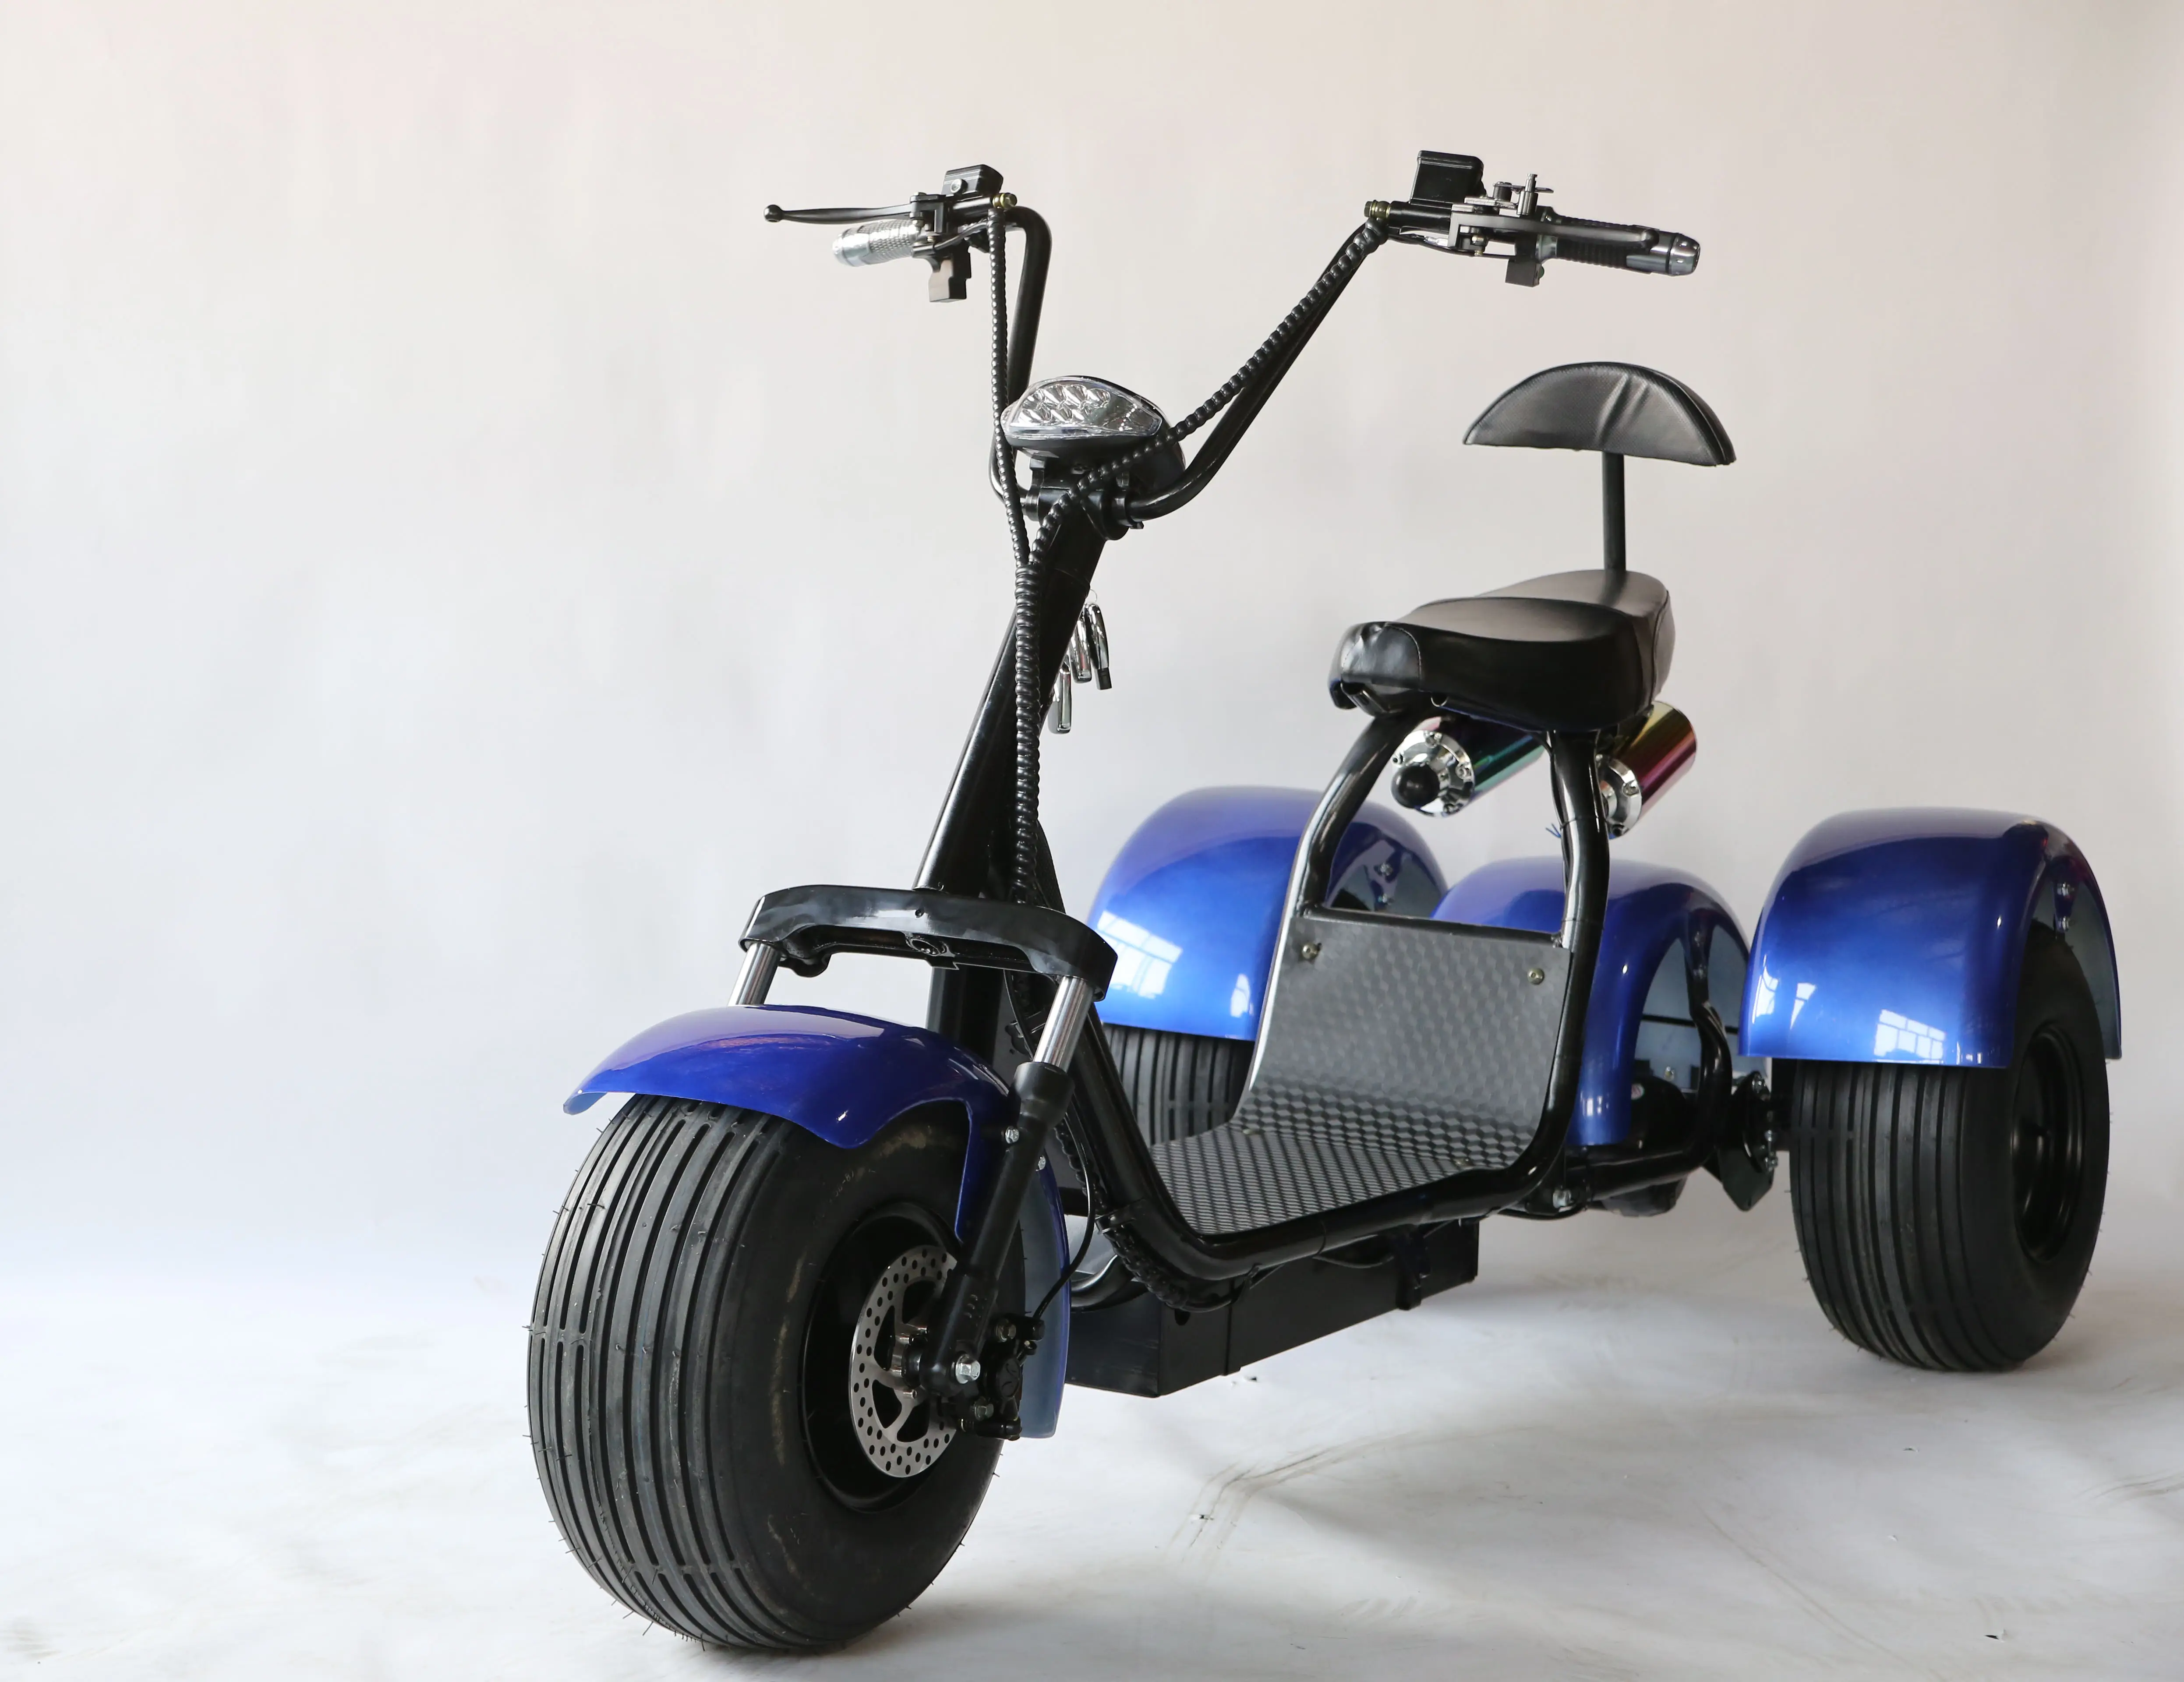 scooter electric 365 pro electric eu warehouse citycoco pro 4000watts 8inch tires motos electric chinas 1000w